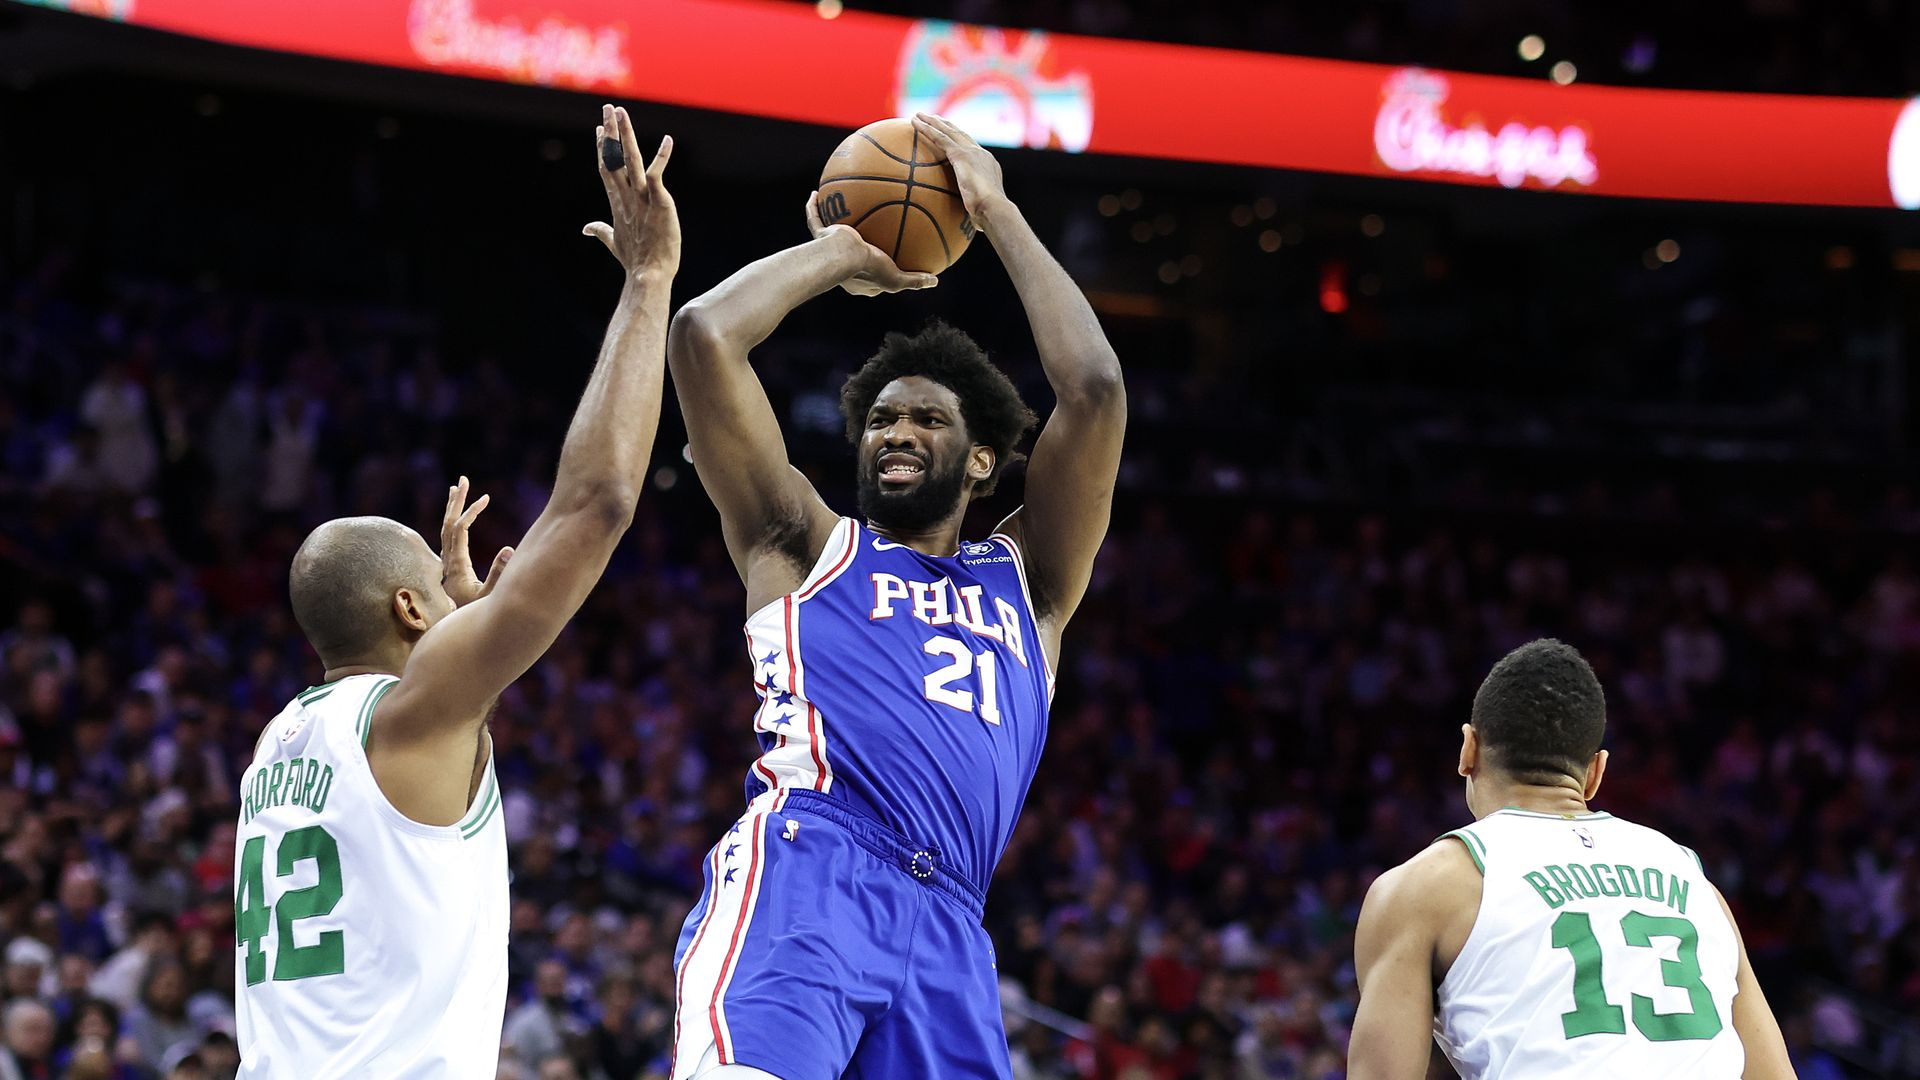 The Sixers' Joel Embiid shoots over Boston's Al Horford.